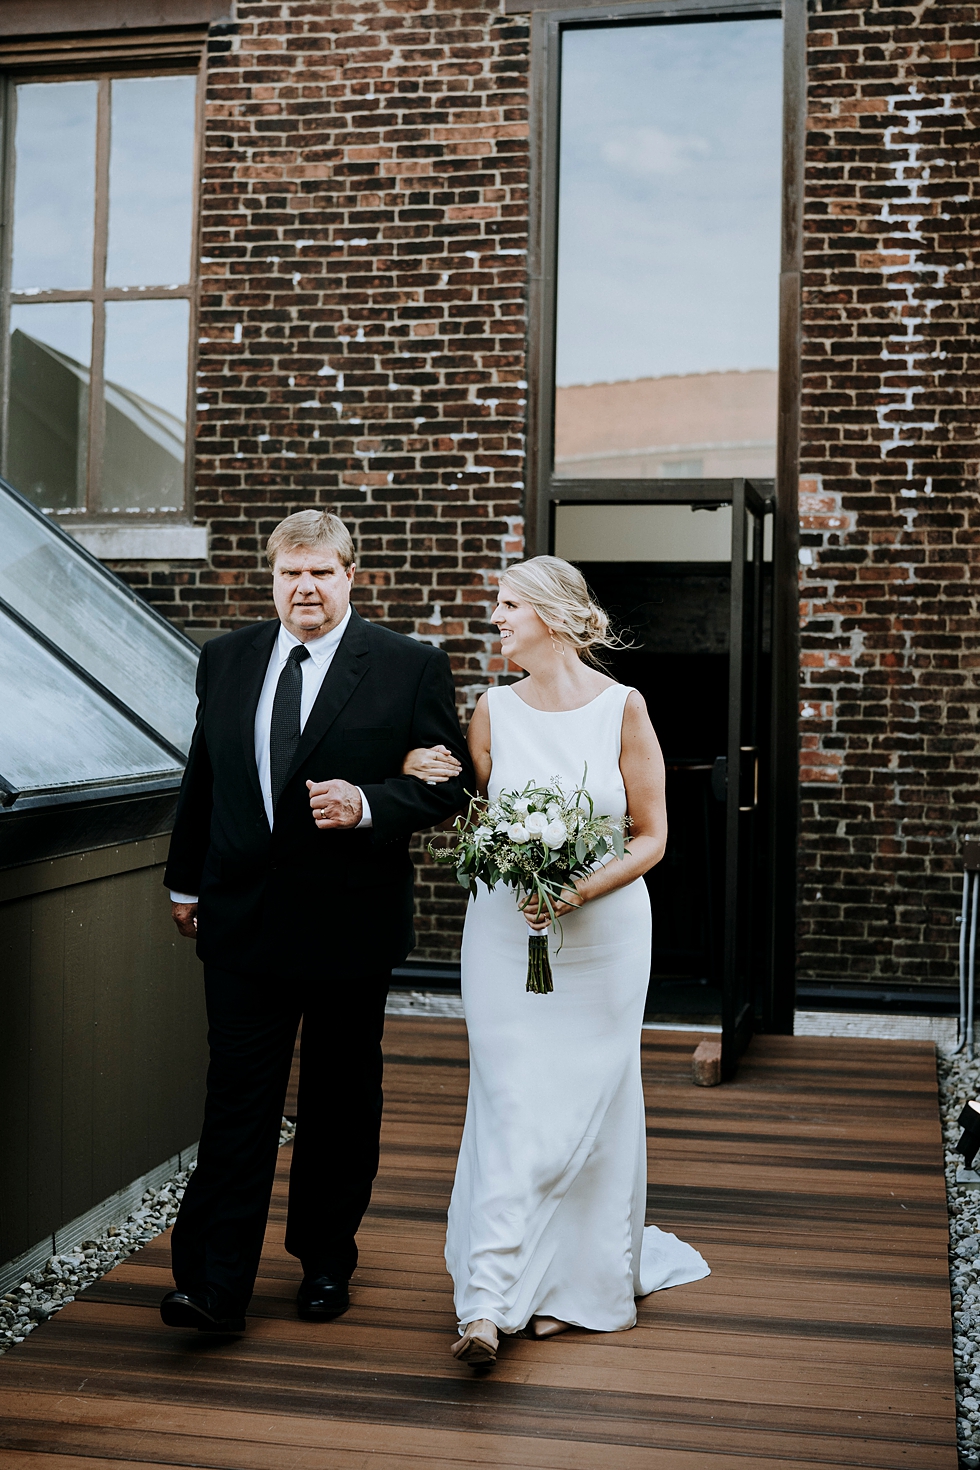  I love when the father of the bride walks his daughter down the aisle! It is so precious. #weddinggoals #weddingphotographer #married #ceremonyandreception #kentuckyphotographer #indianaphotographer #louisvillephotographer #weddingphotos #husbandand